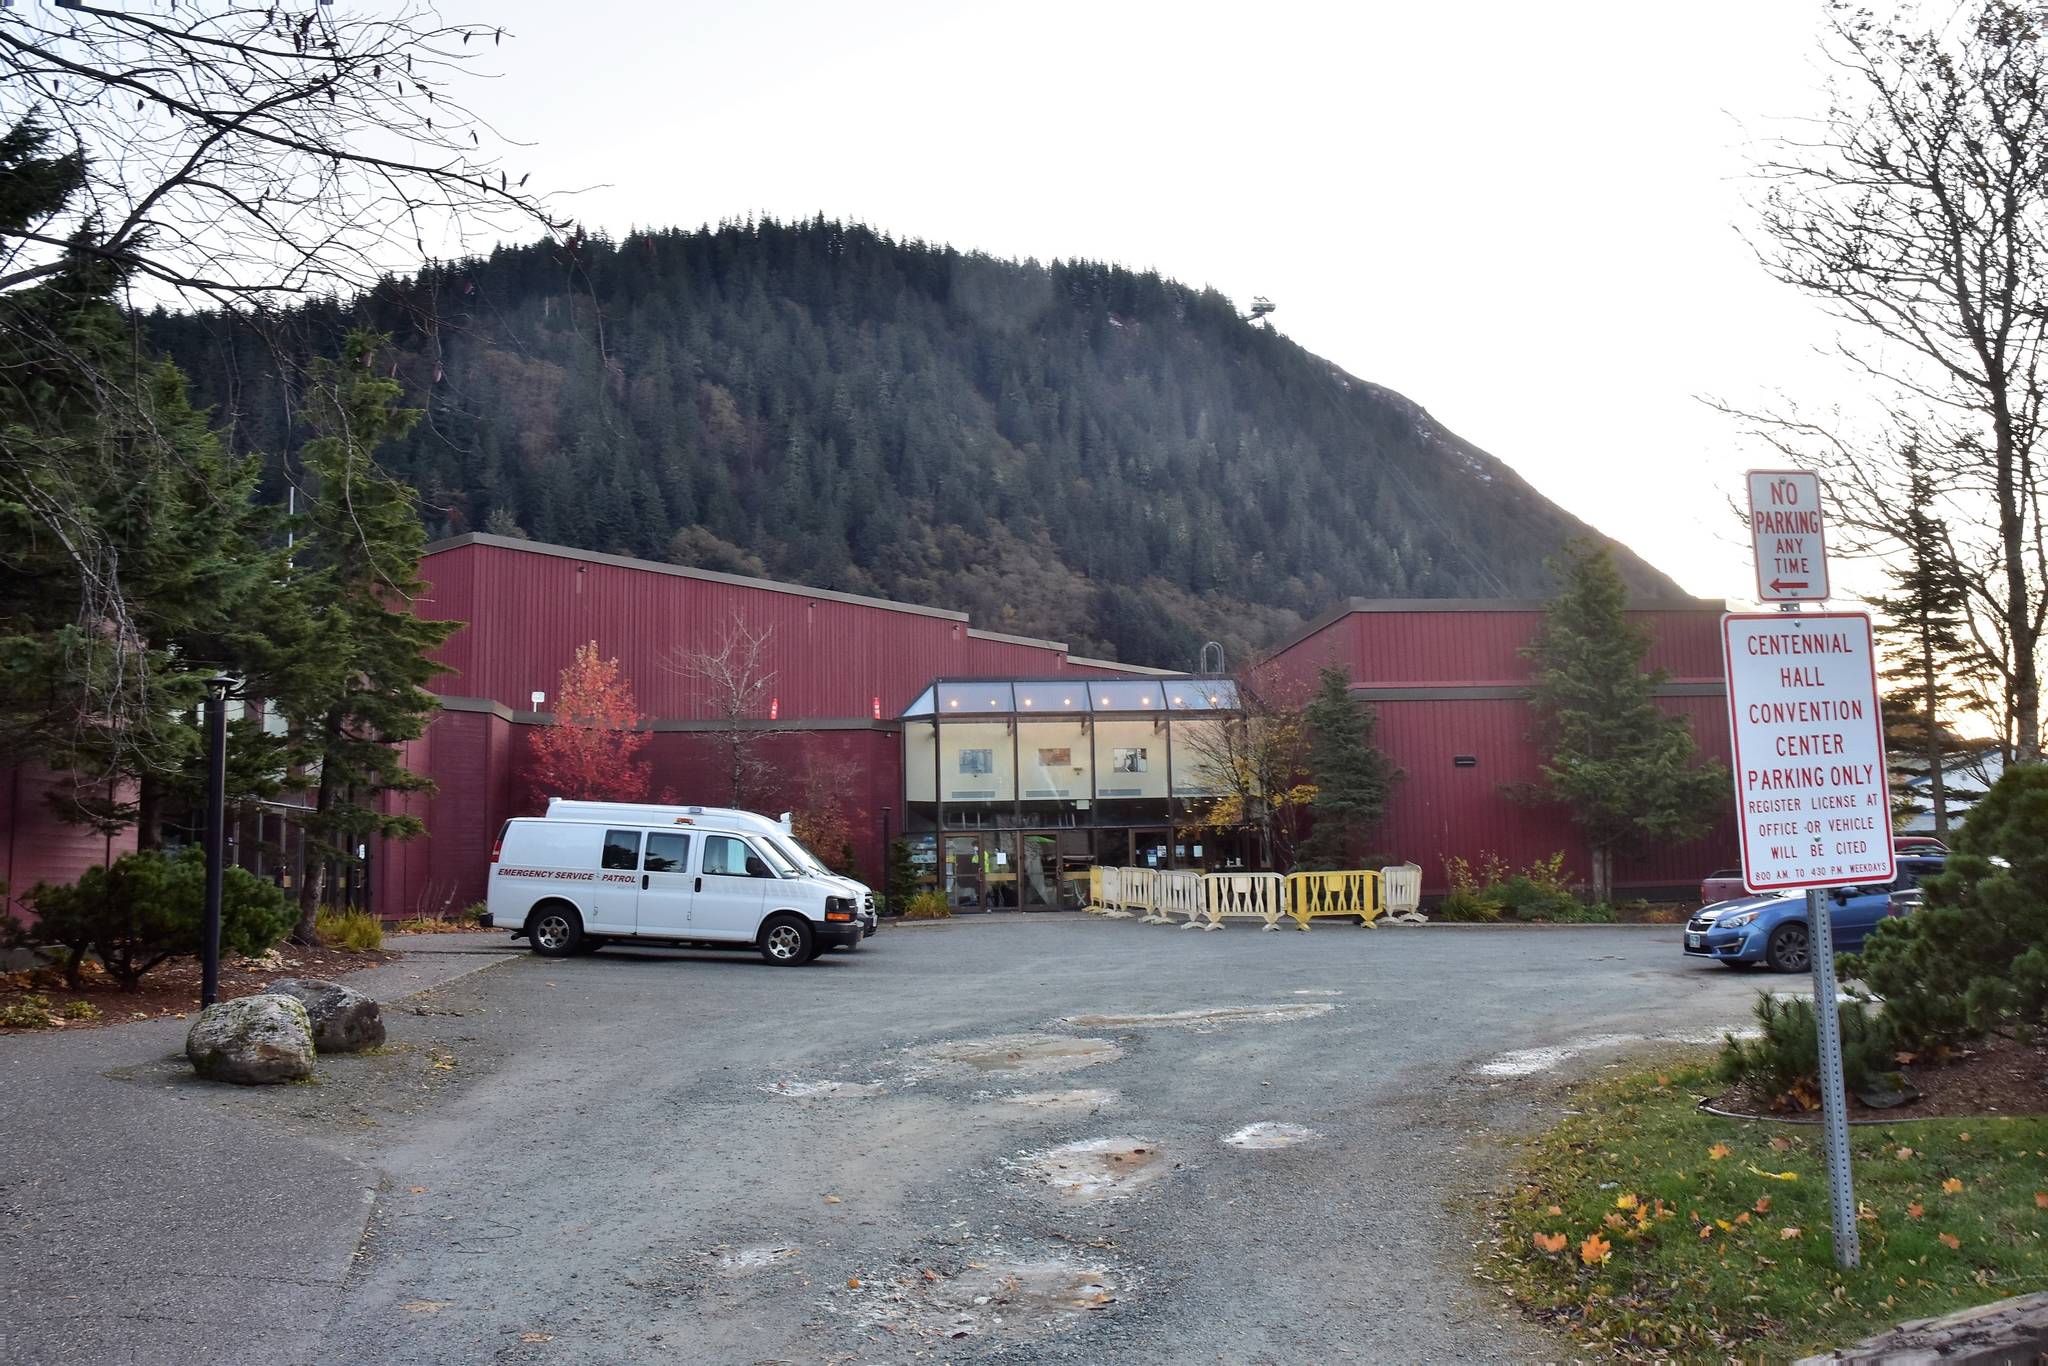 The City and Borough of Juneau converted Centennial Hall into a quarantine facility for unsheltered people who’ve tested positive for COVID-19 and can’t isolate on their own. Wednesday, Oct. 21, 2020. (Peter Segall / Juneau Empire)